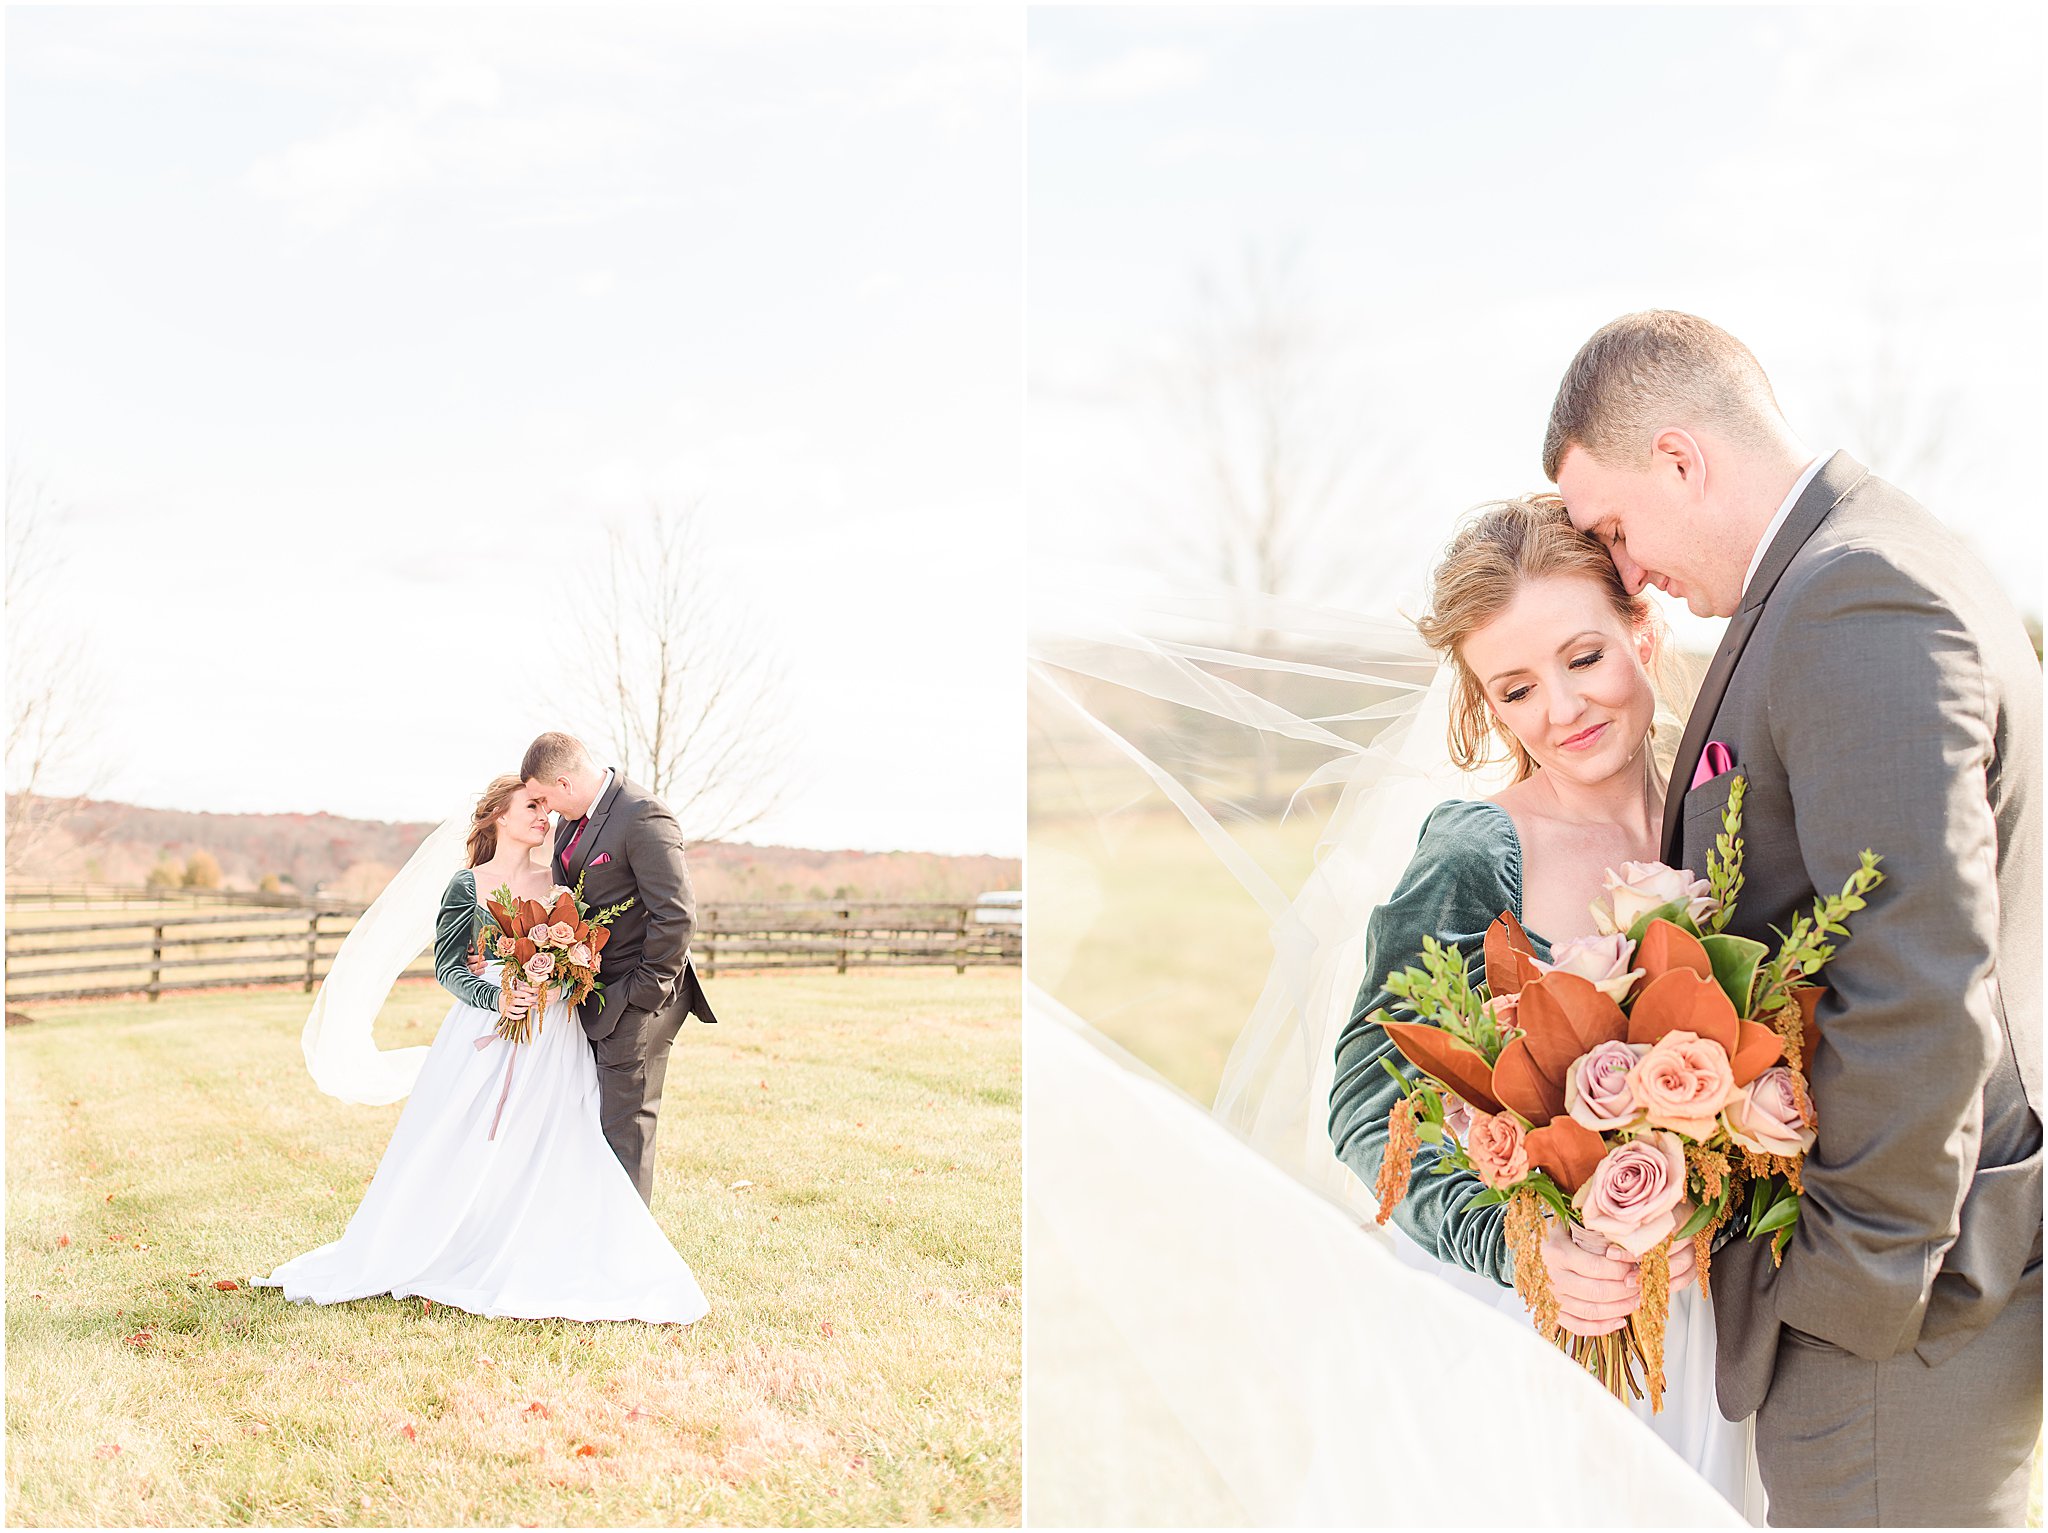 Bride and groom nuzzling with veil blowing in the wind Mount Ida Farm wedding